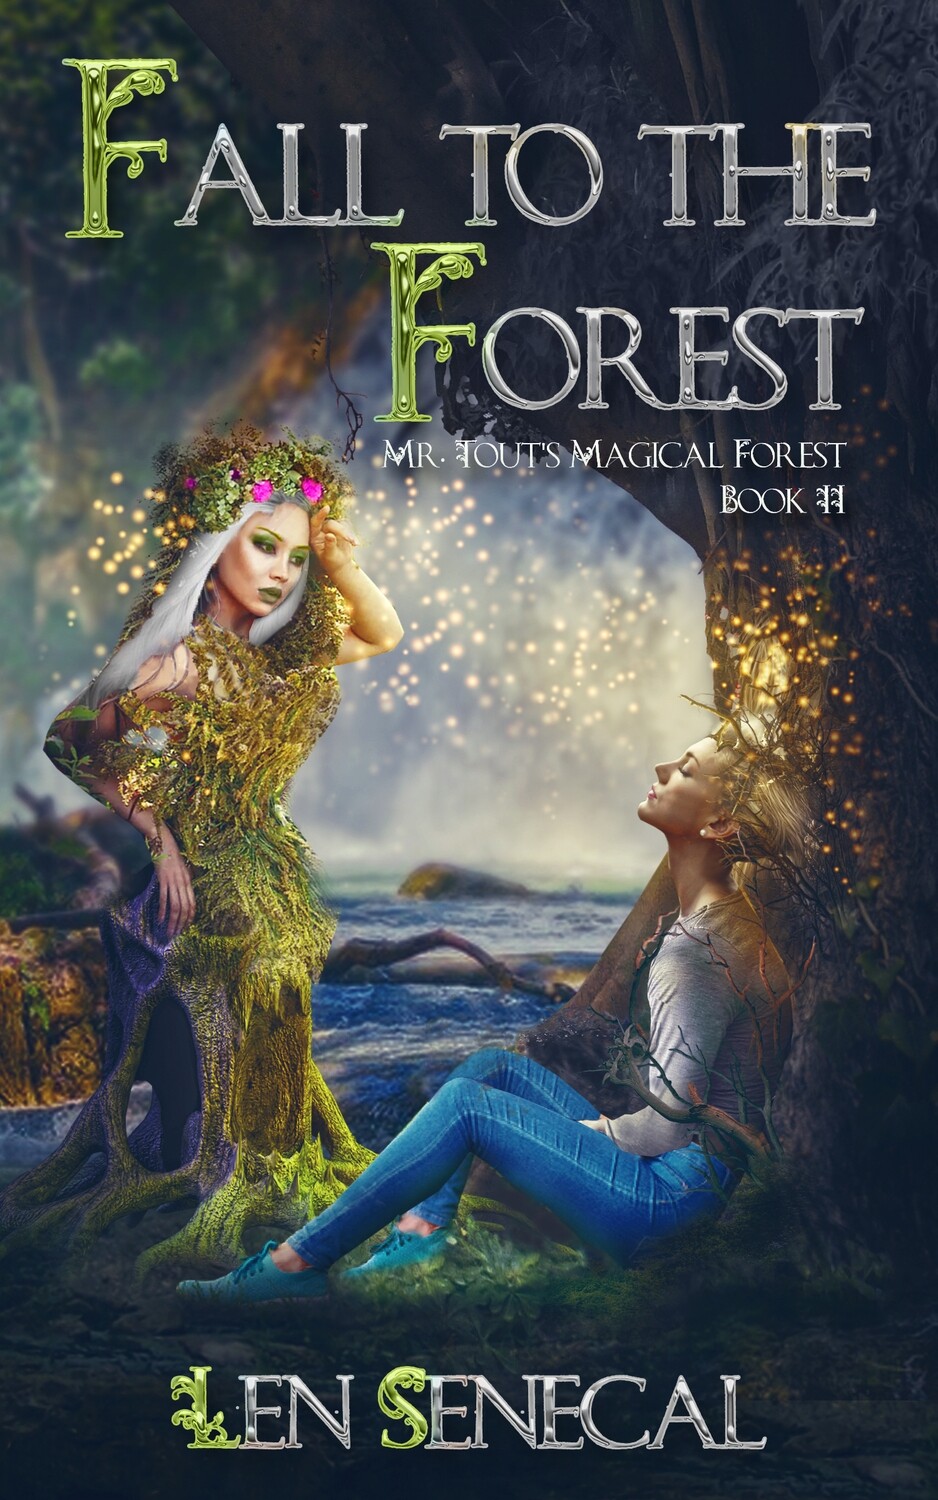 Fall to the Forest-Book II of Mr. Tout's Magical Forest paperback edition (signed)